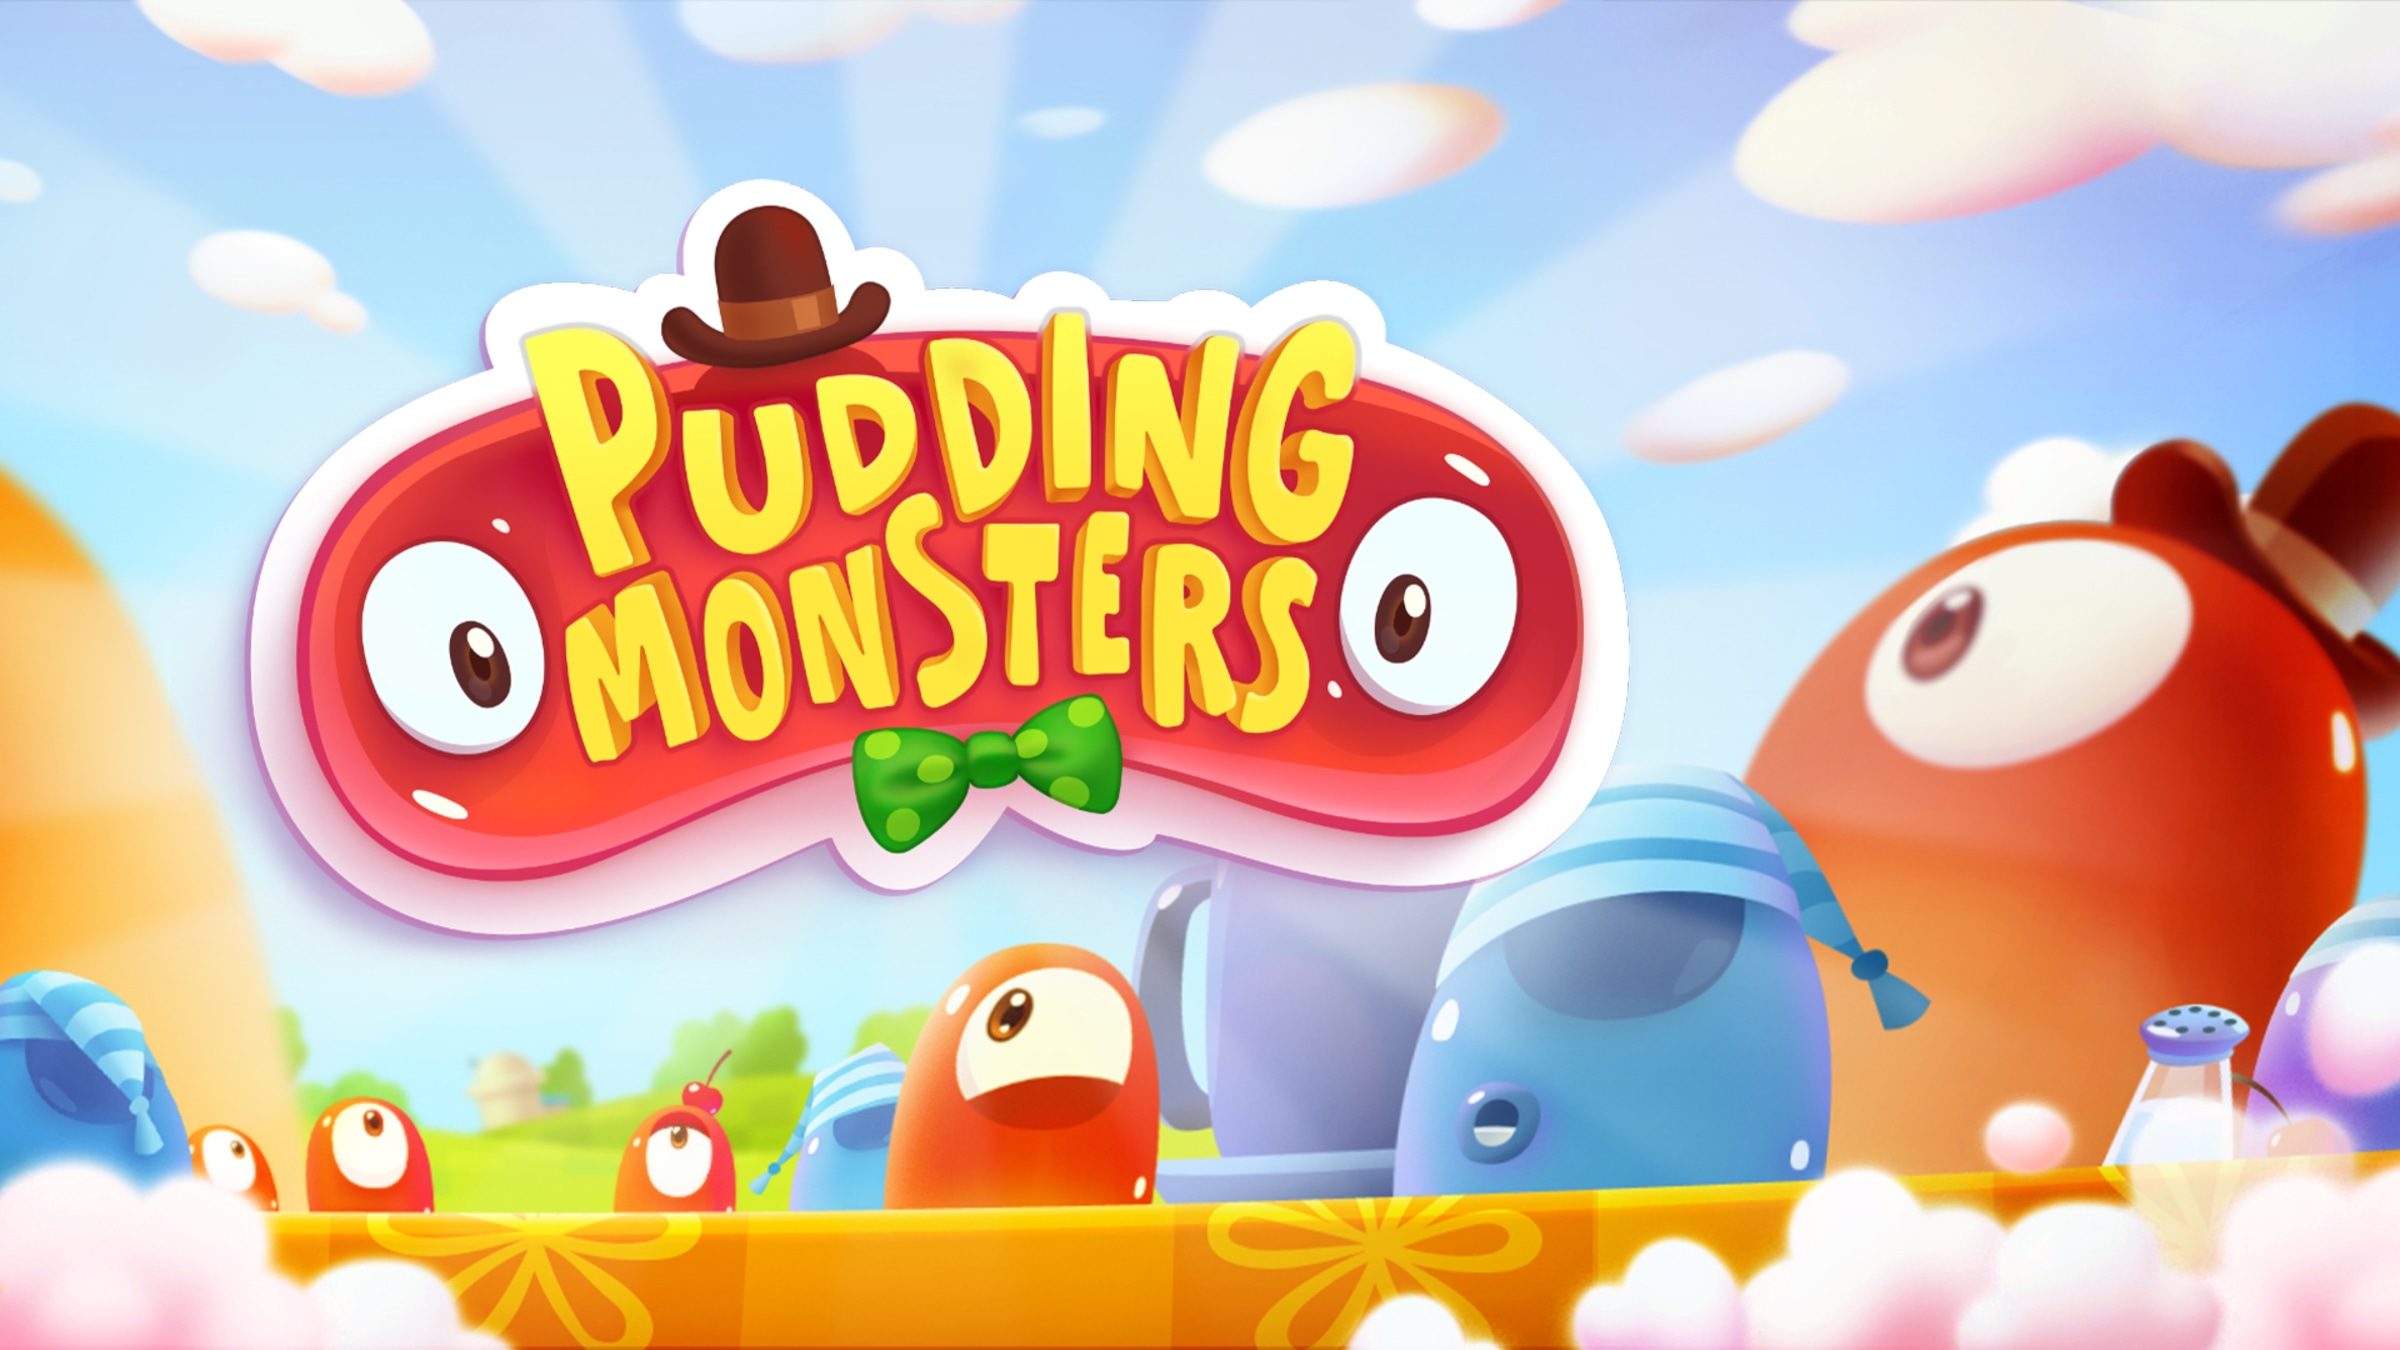 Pudding Monsters For Nintendo Switch - Nintendo Official Site